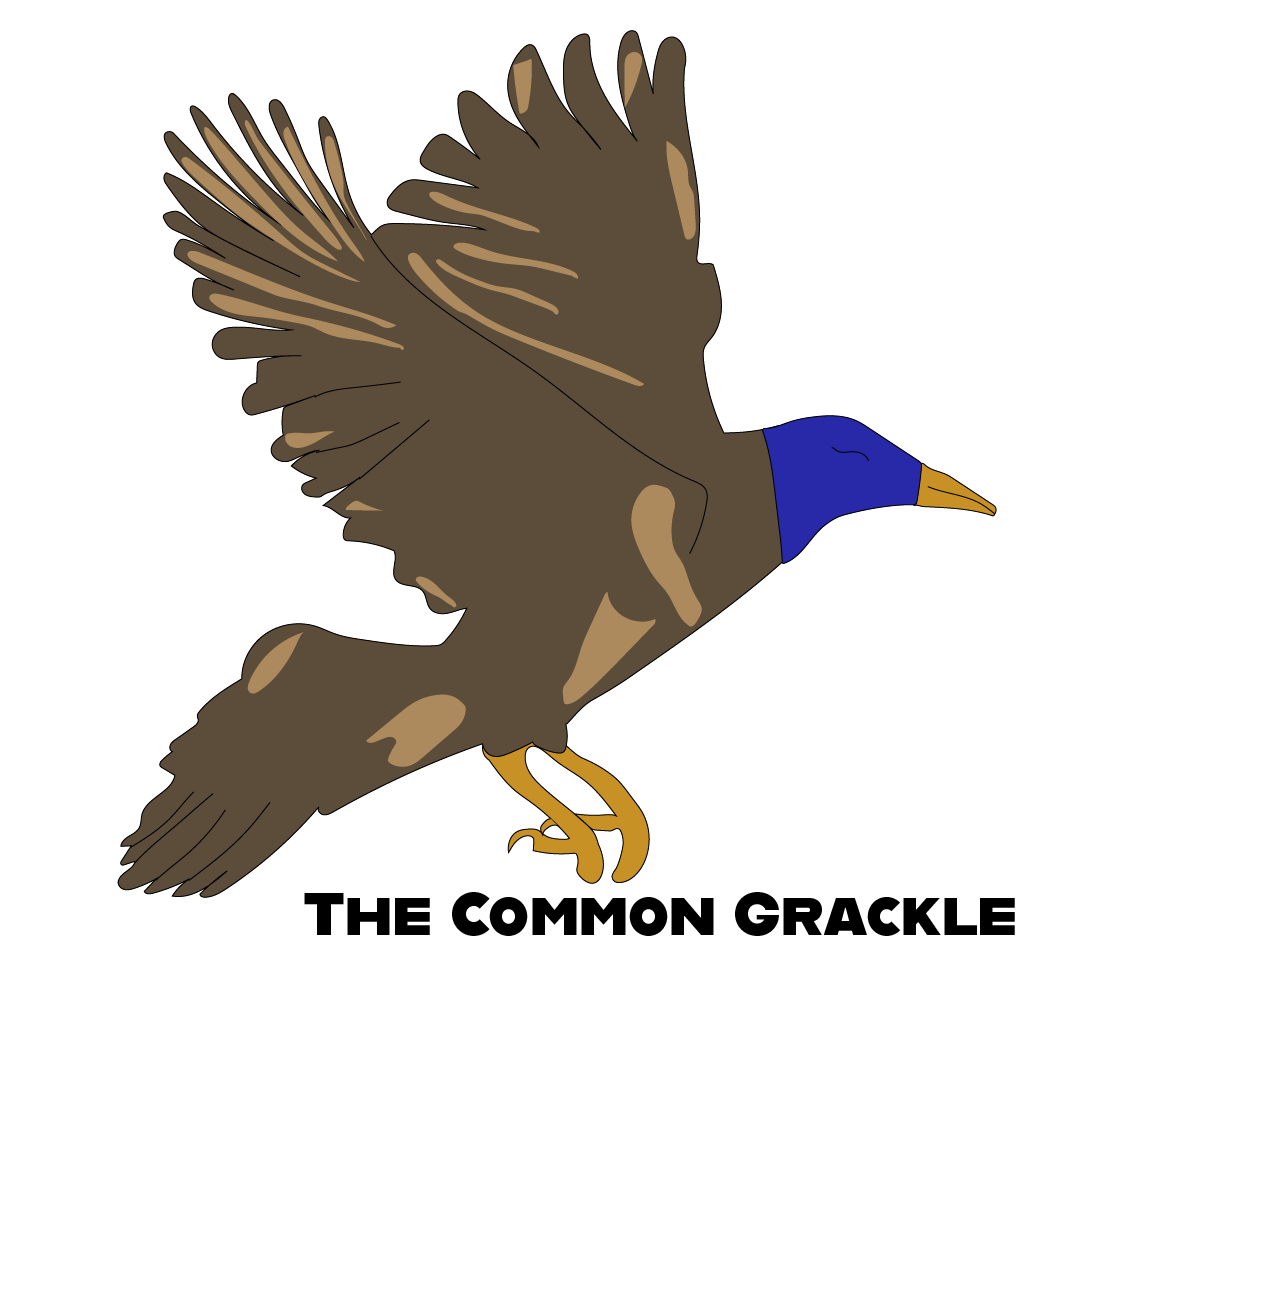 The Common Grackle